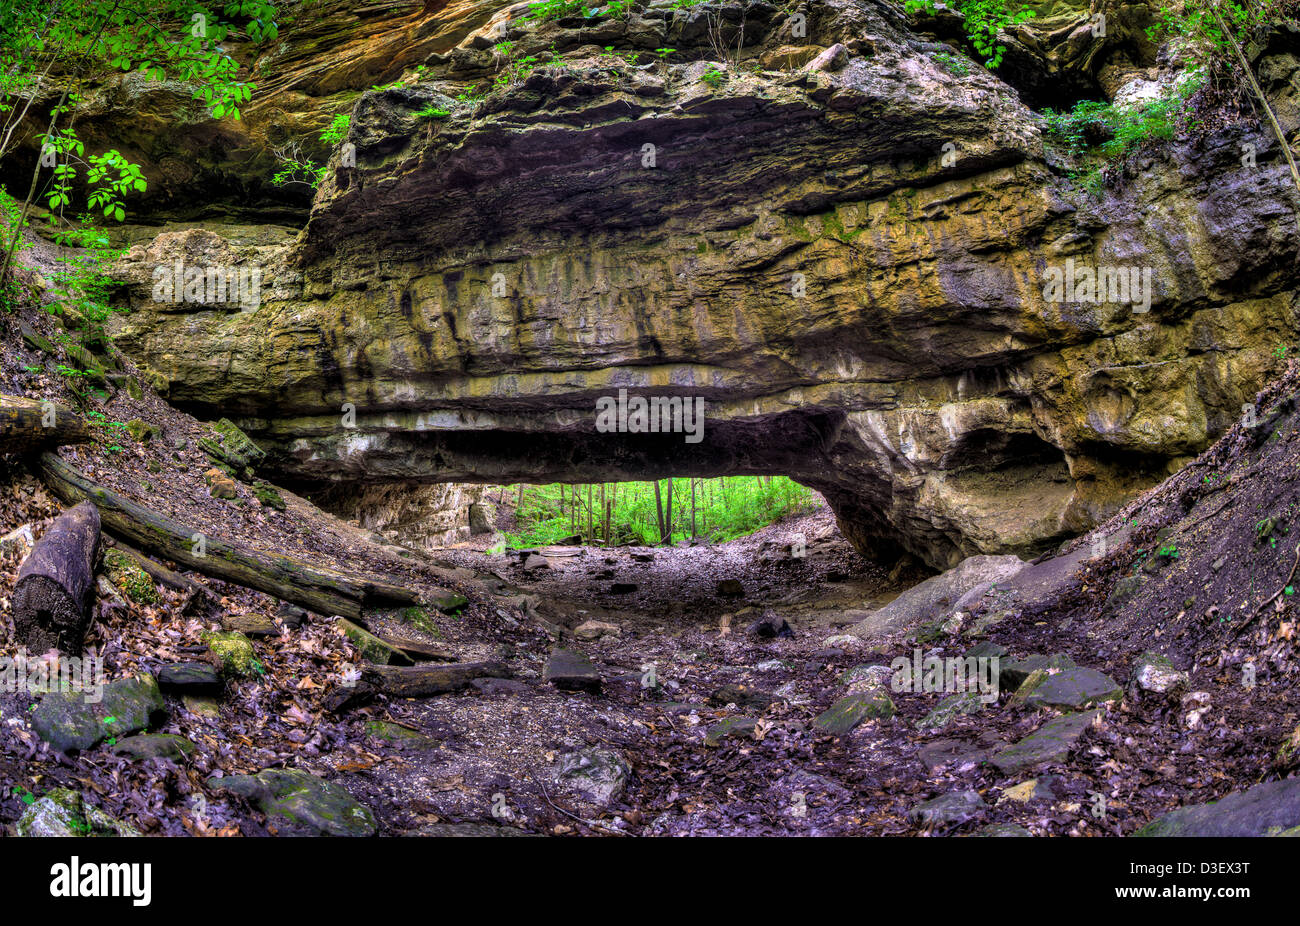 A wide angle shot of a natural rock bridge in a forest. Stock Photo